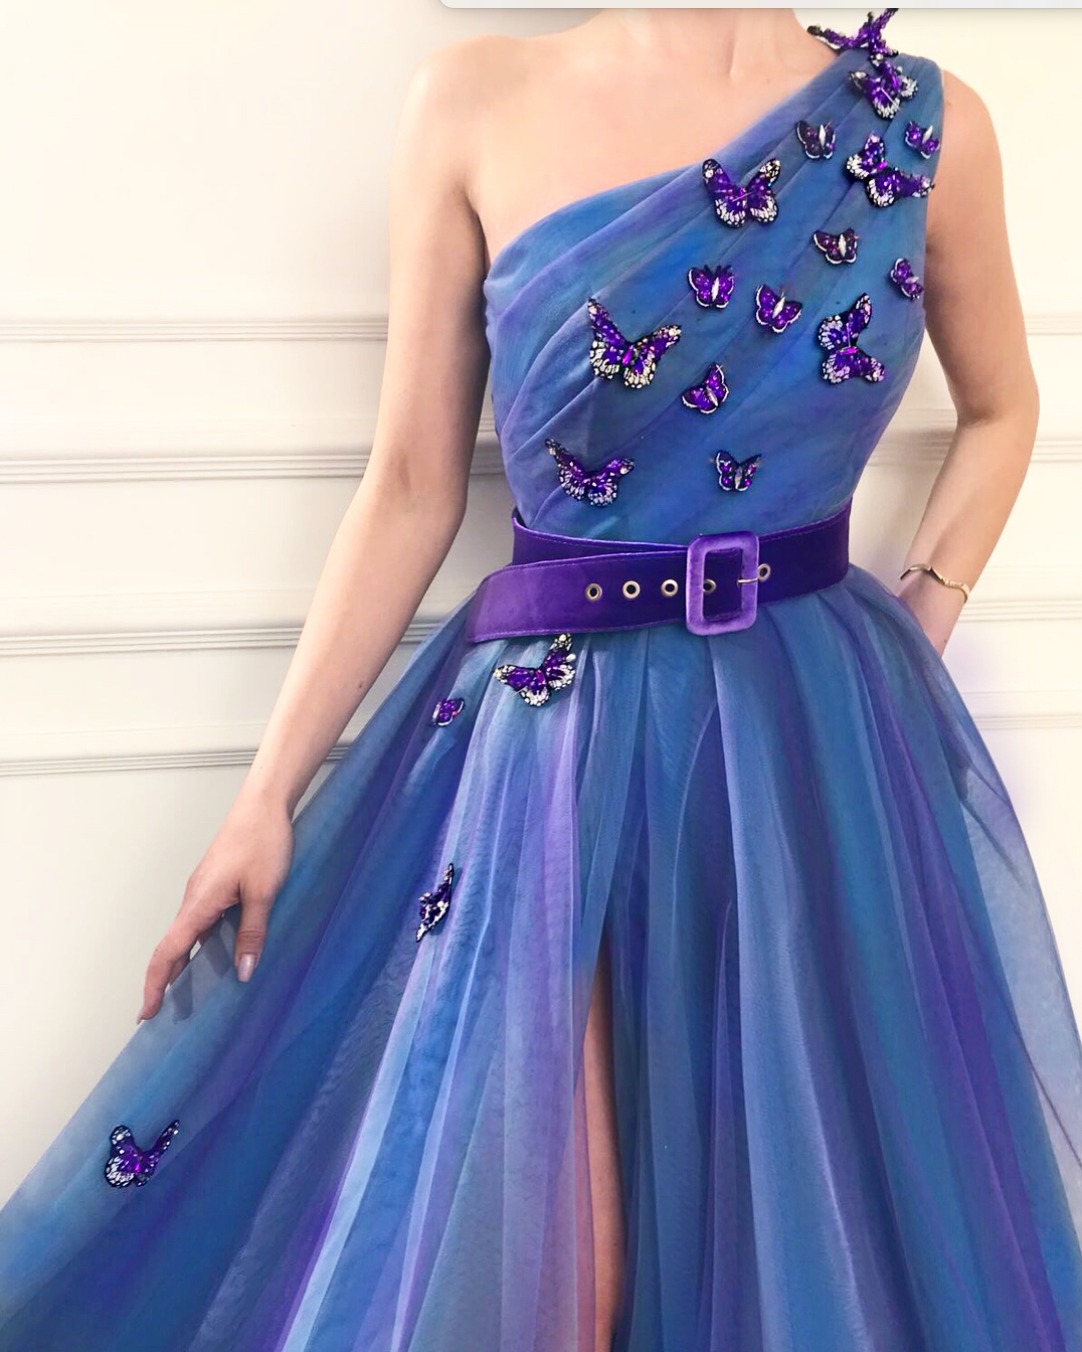 Blue A-Line dress with one shoulder sleeve, belt and embroidery